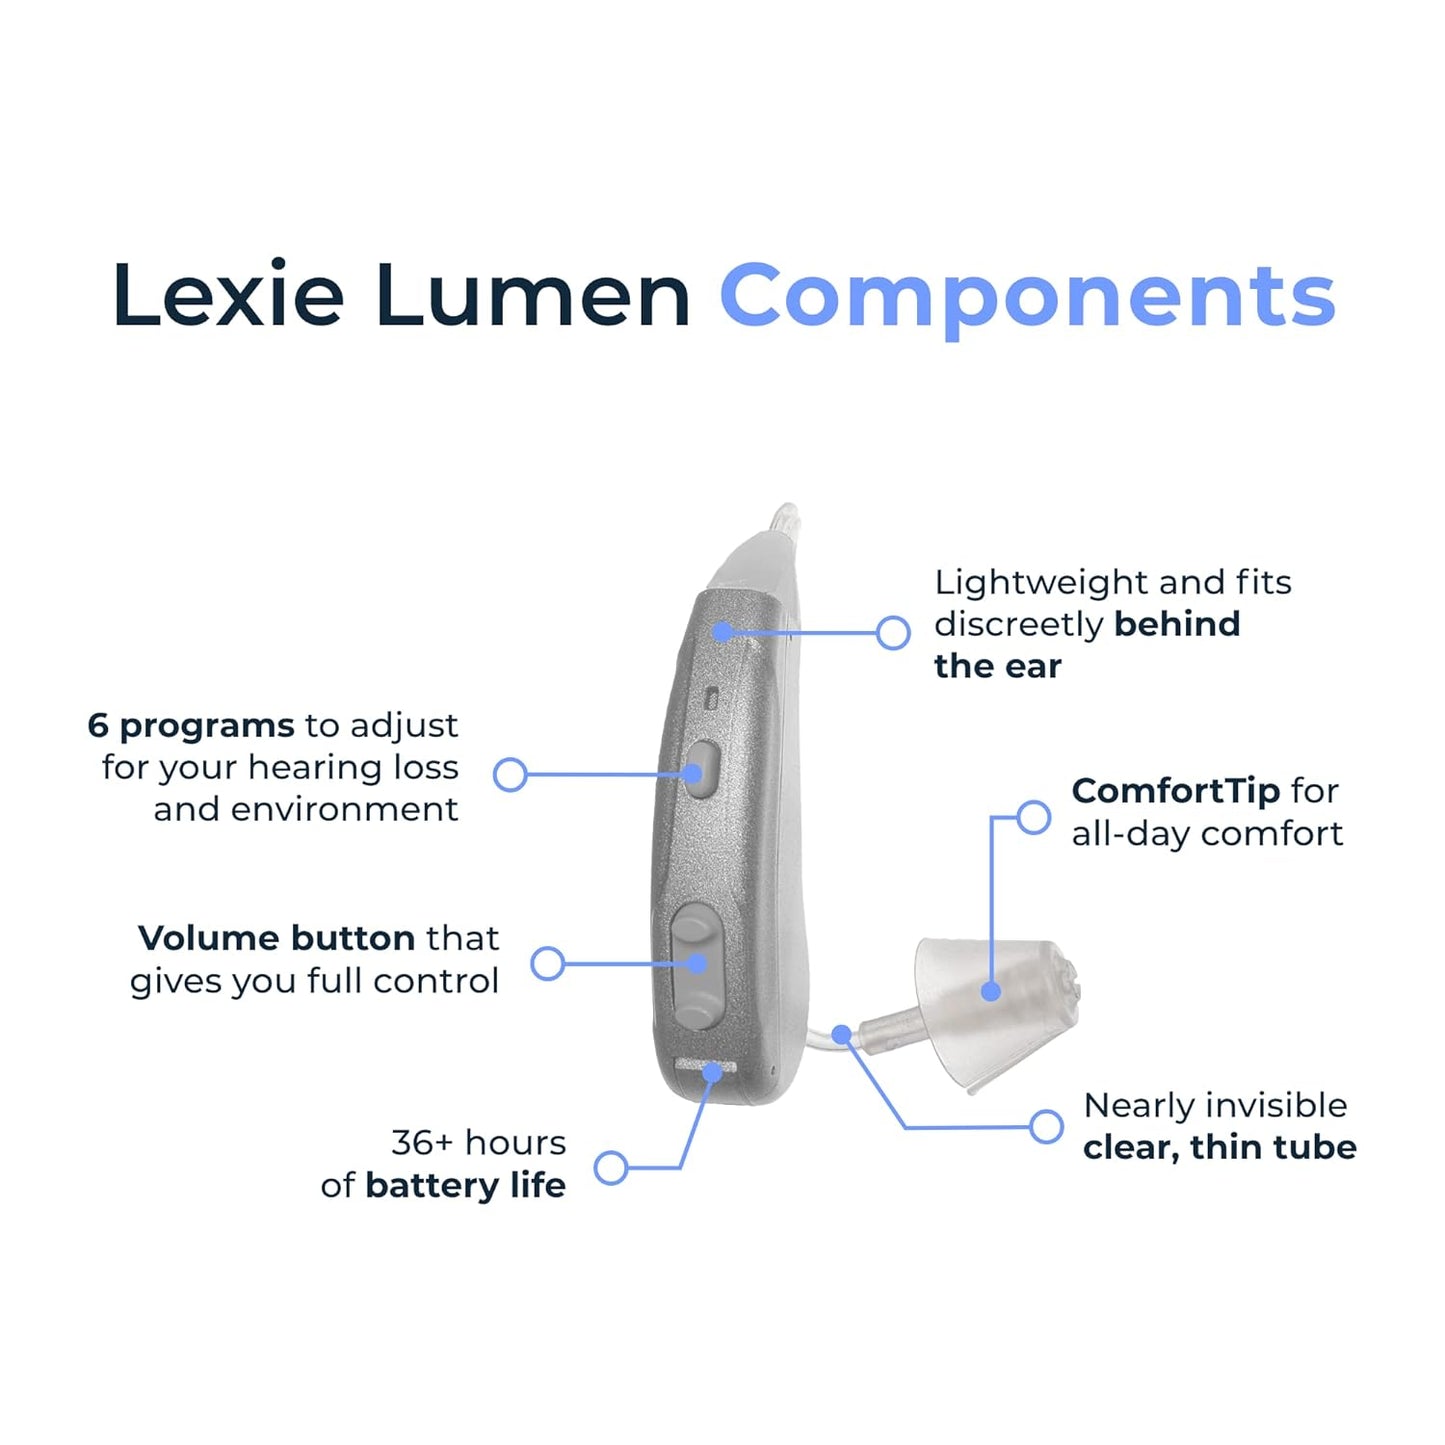 Lexie Lumen Self-Fitting OTC Hearing Aids | Mild to Moderate Hearing Loss | Bluetooth Hearing Aid with Invisible Fit | Directional Hearing, Advanced Battery Power & Smartphone Control (Silver) (Silver)